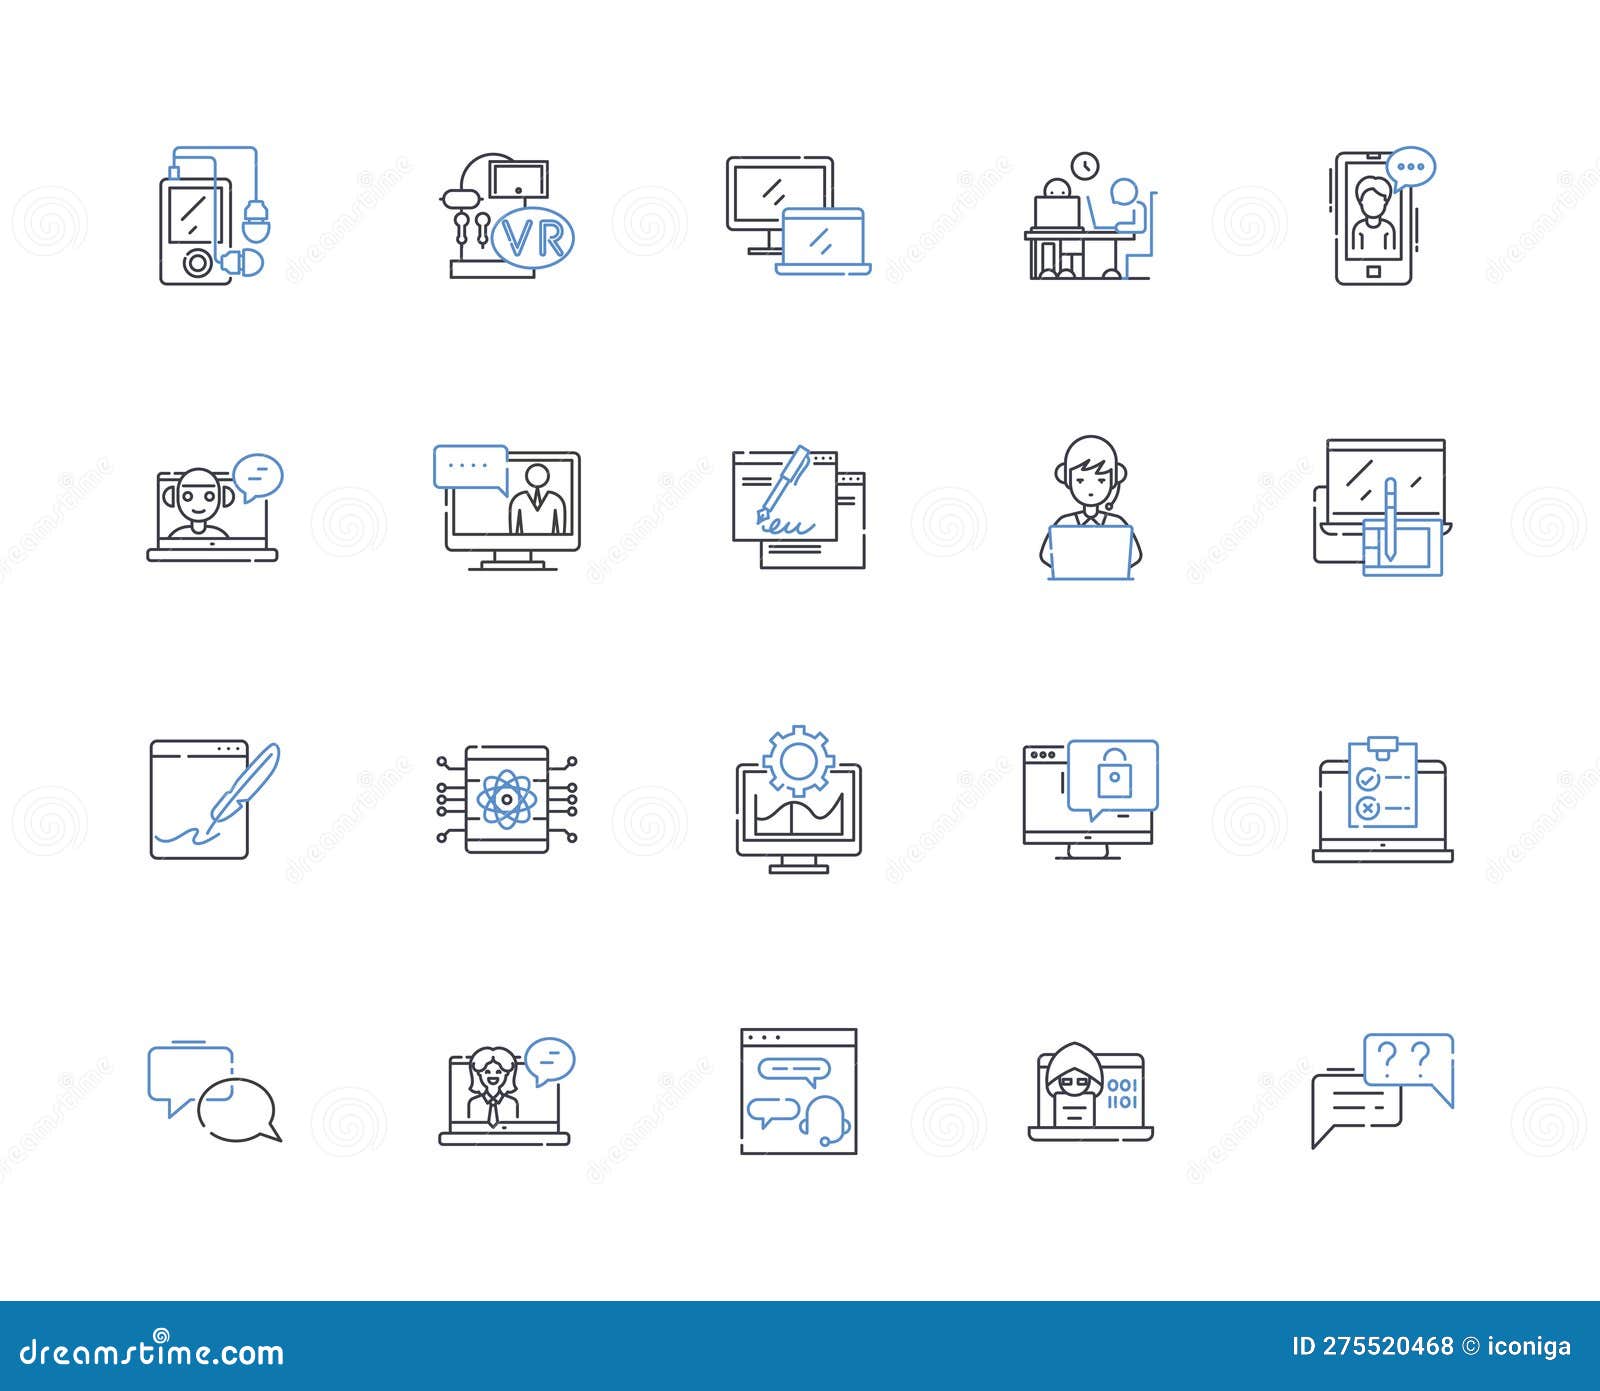 subscriber line icons collection. follower, supporter, benefactor, devotee, admirer, sponsor, advocate  and linear